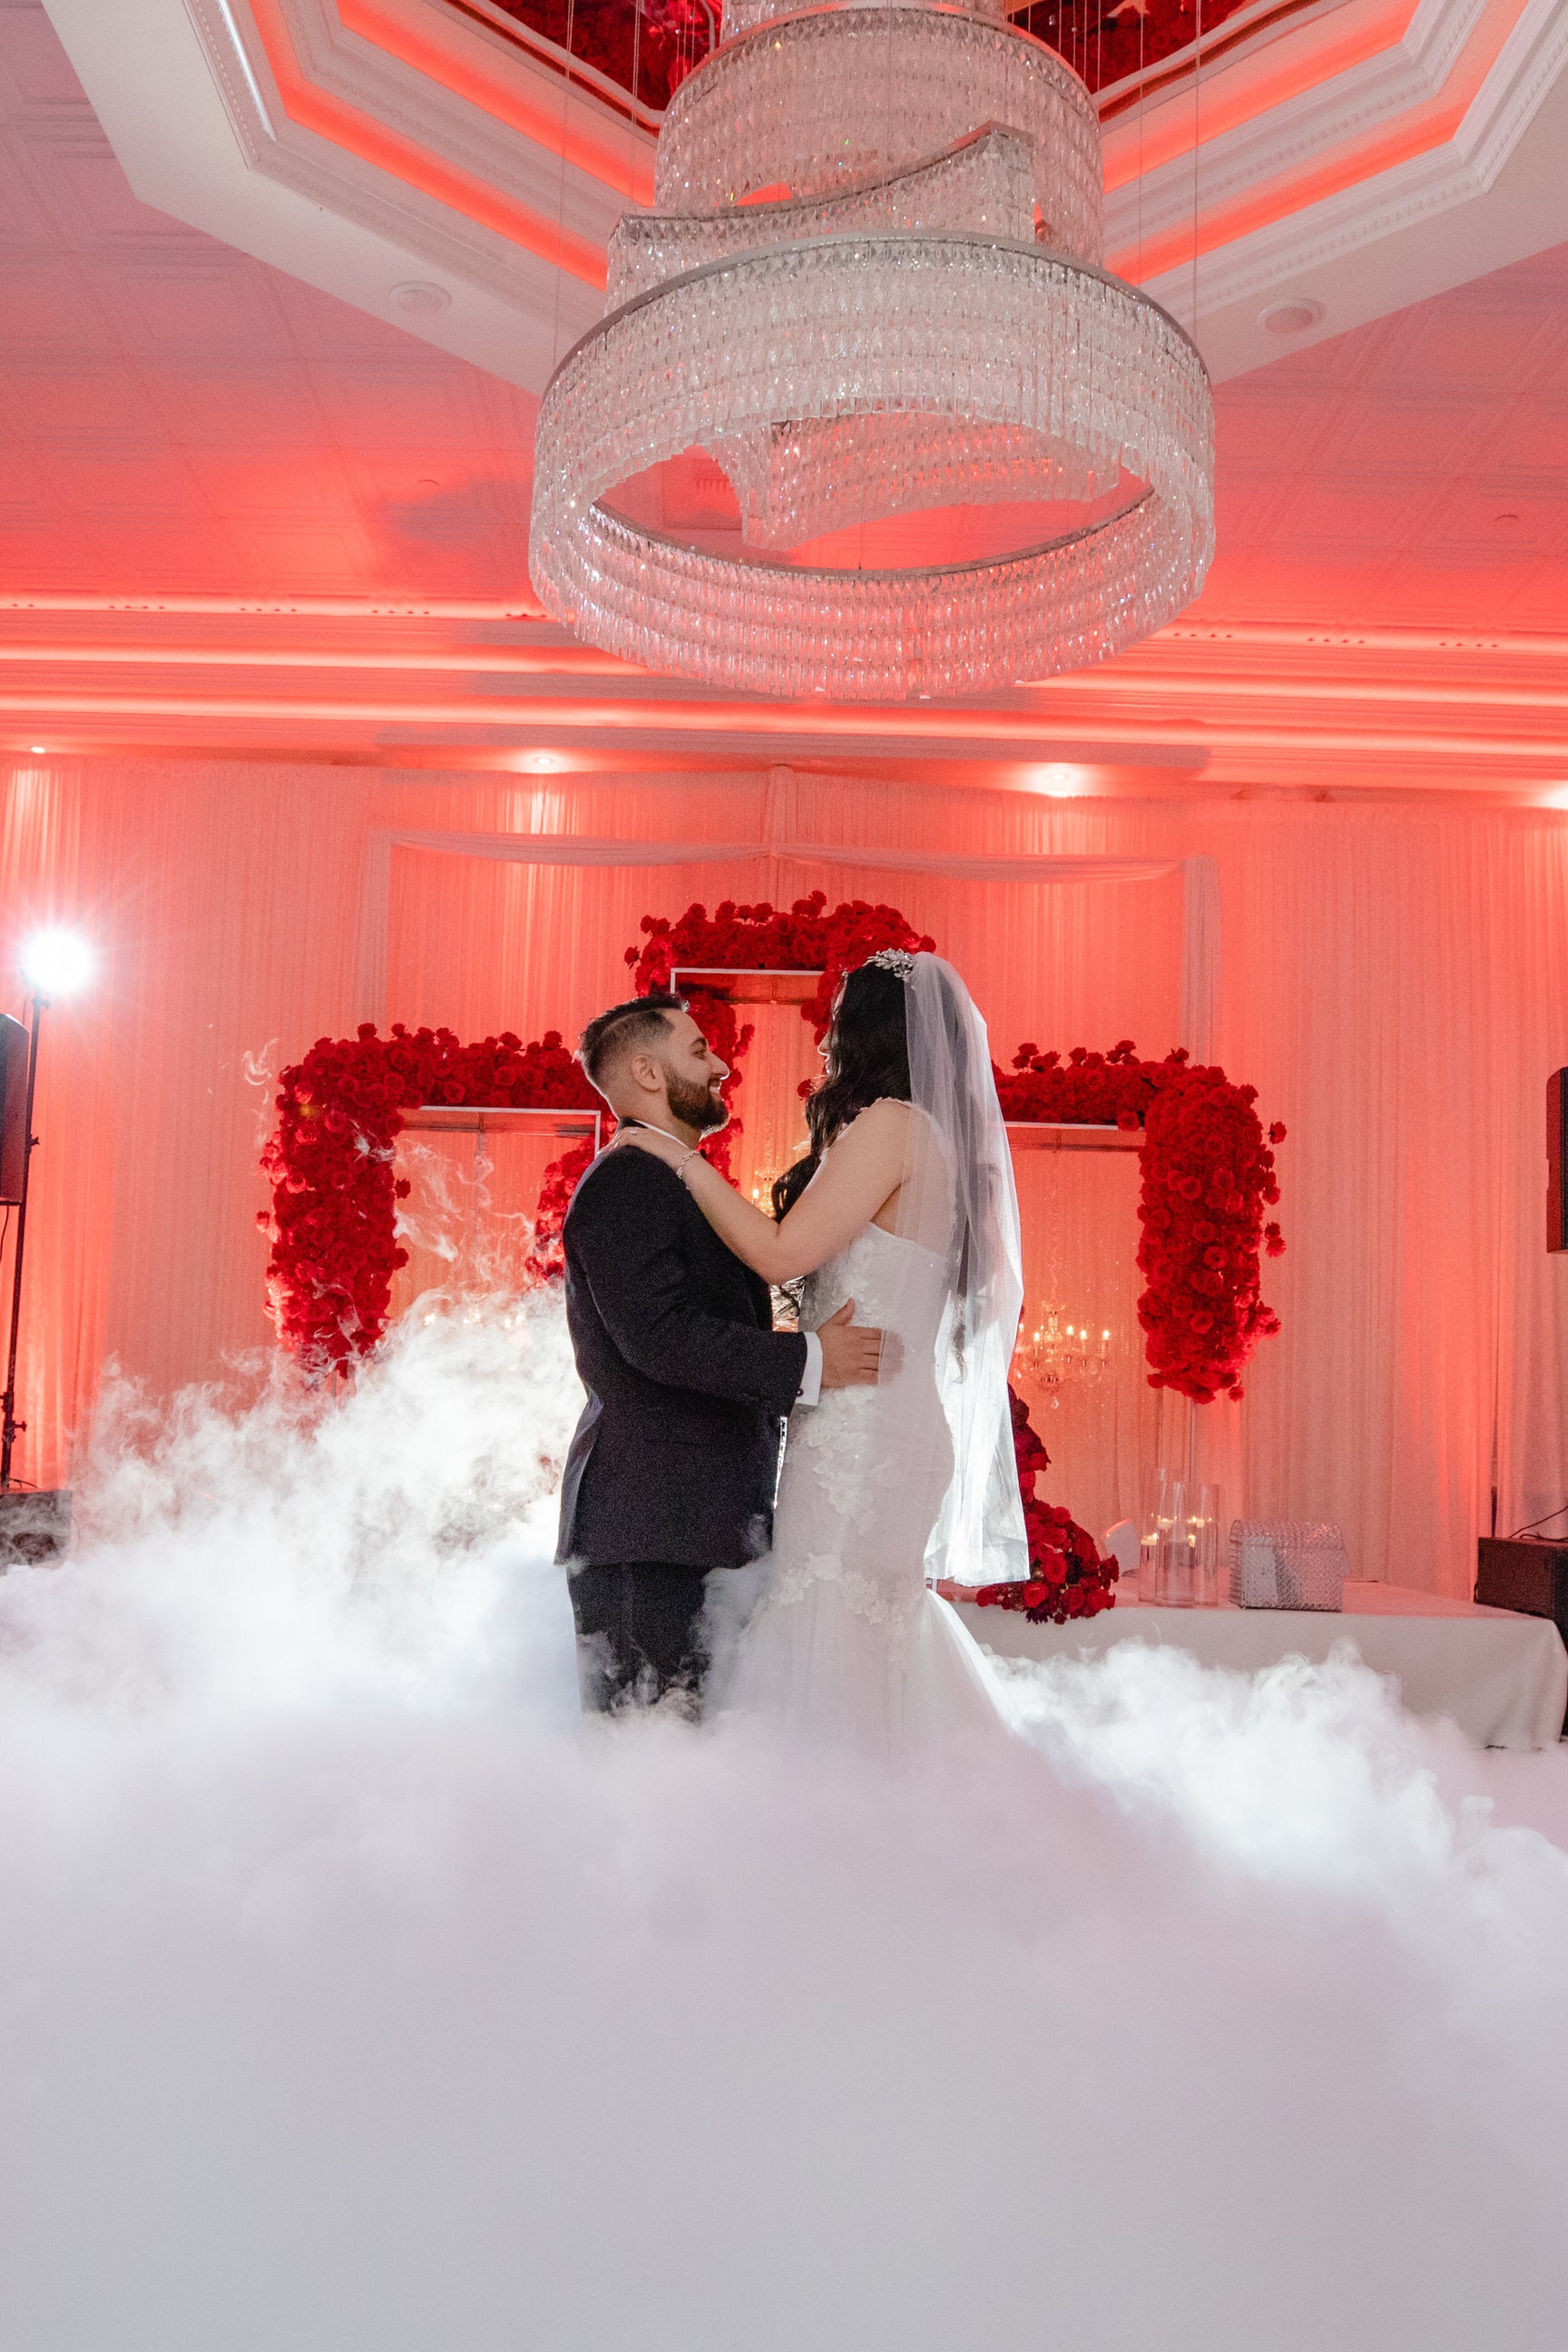 lavish reception for Persian couple with bride wearing fingertip length rhinestone wedding veil in downdo curls